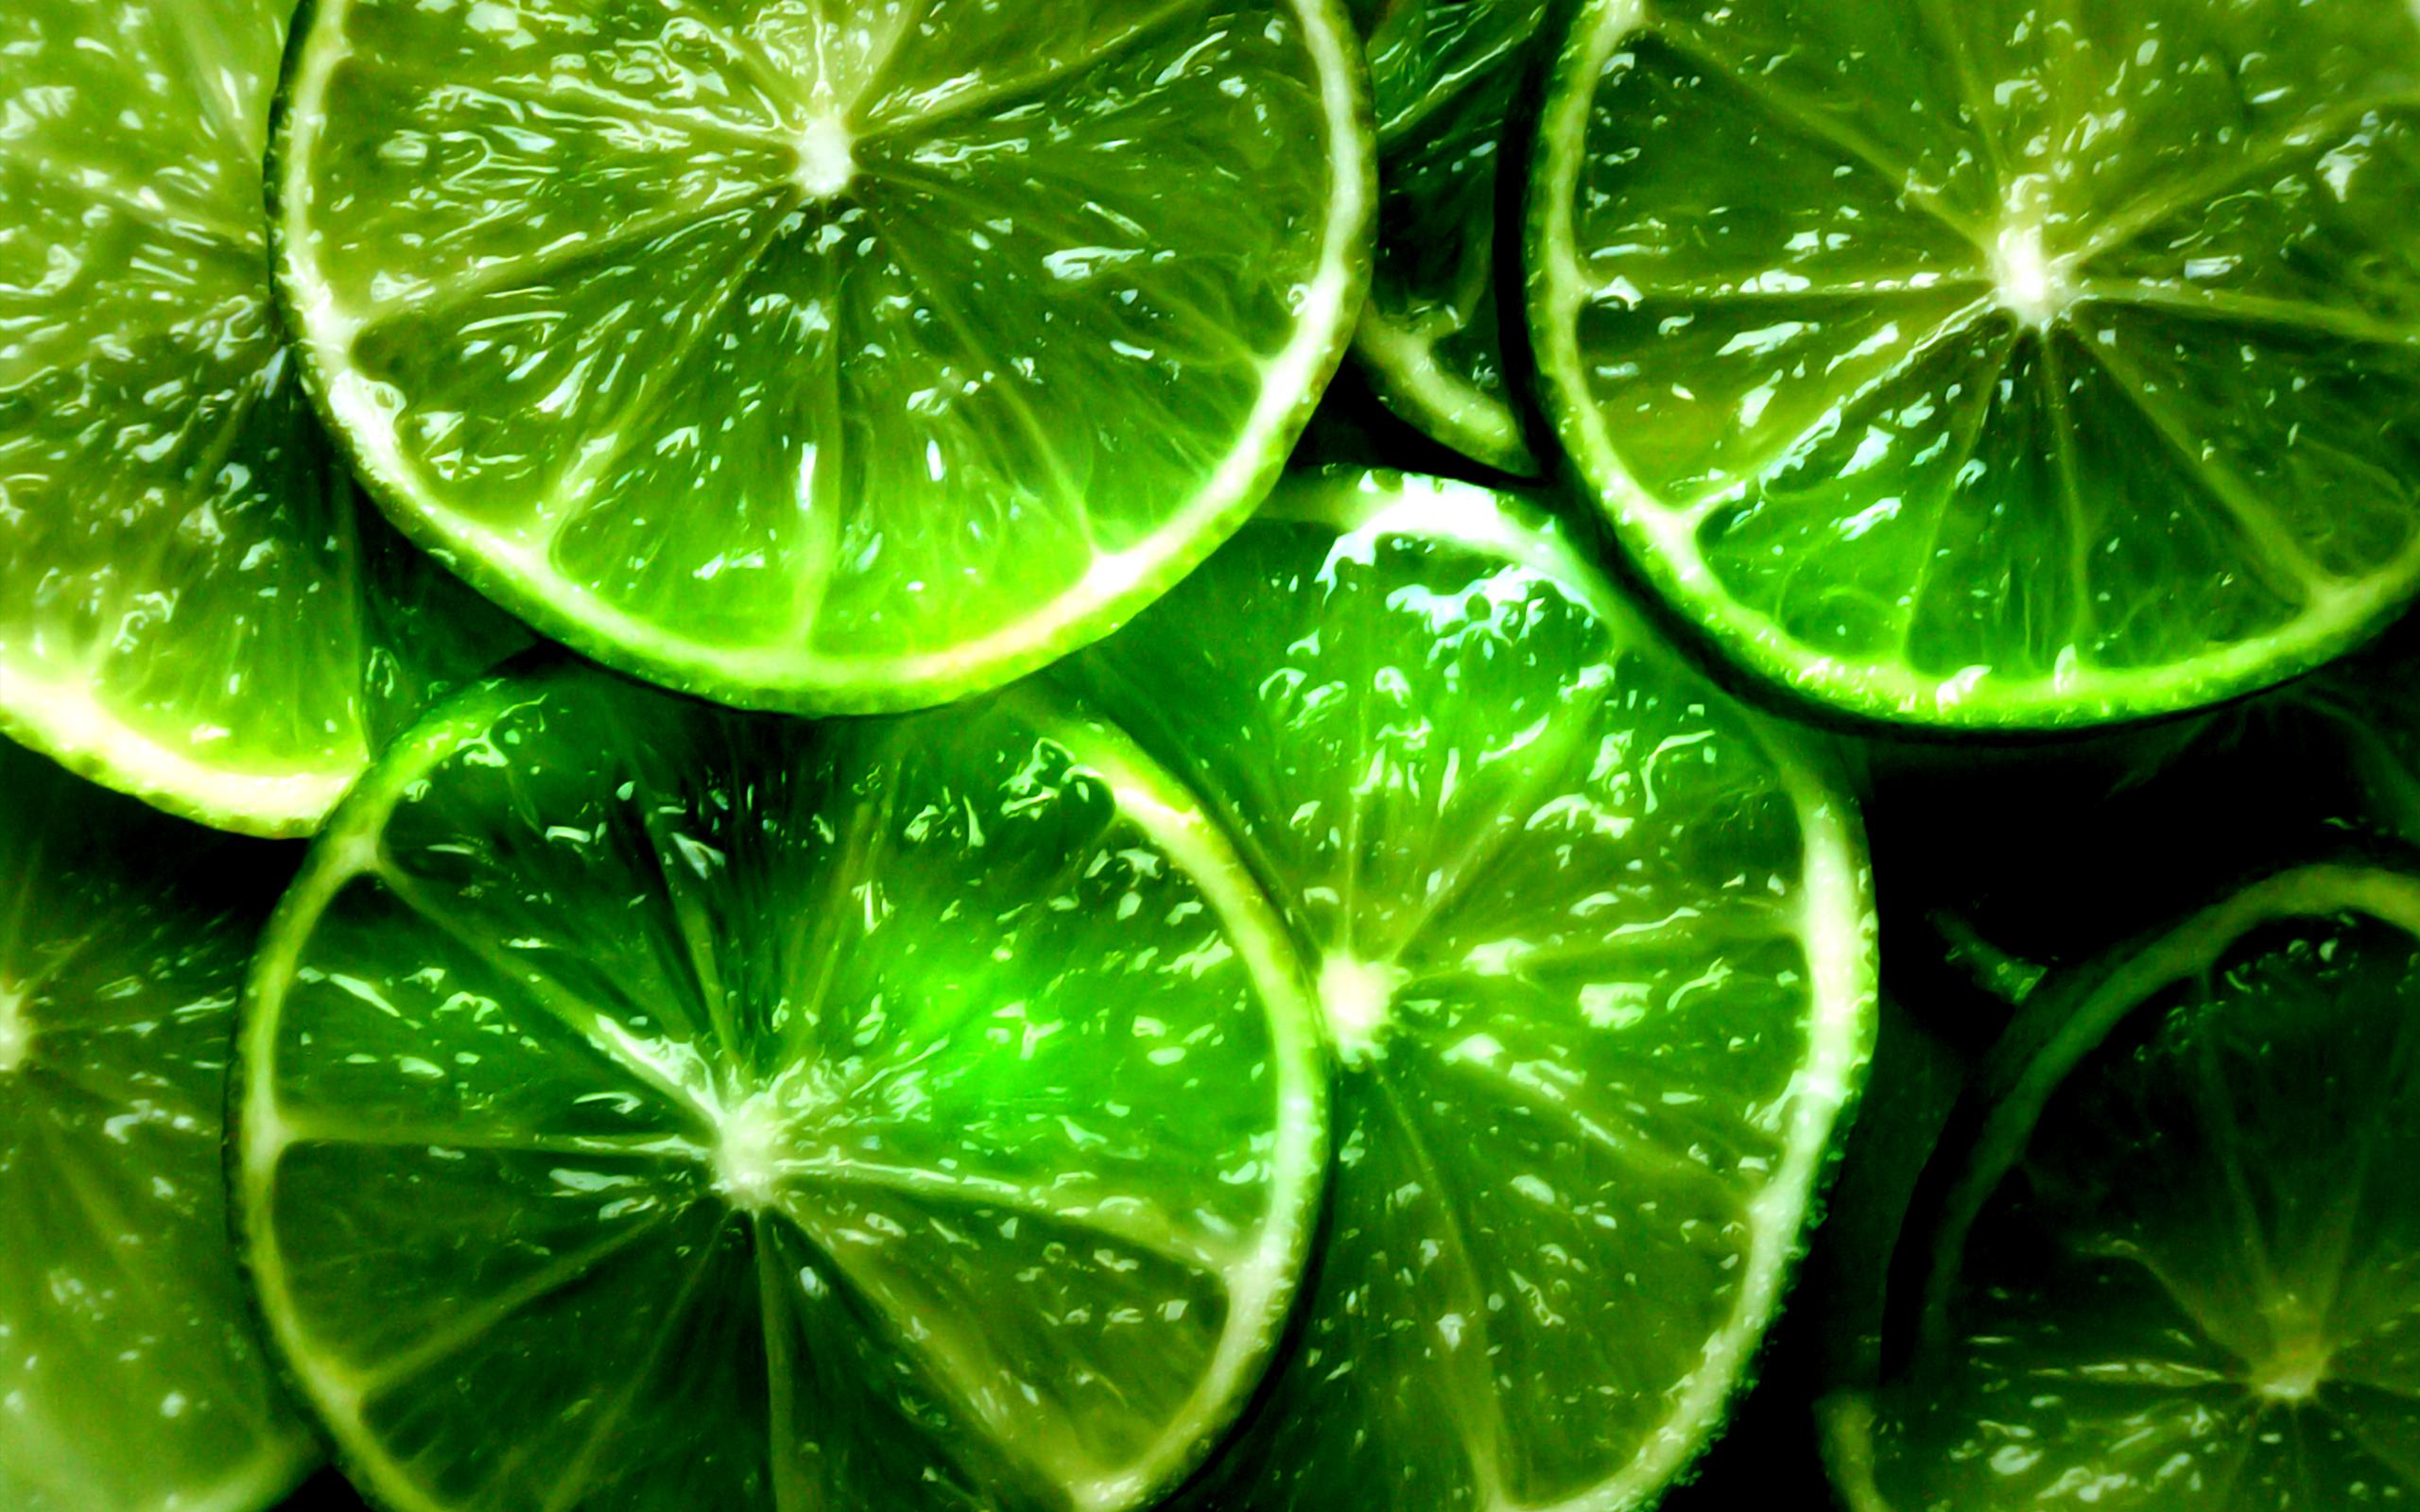 Lemon 4K wallpaper for your desktop or mobile screen free and easy to download